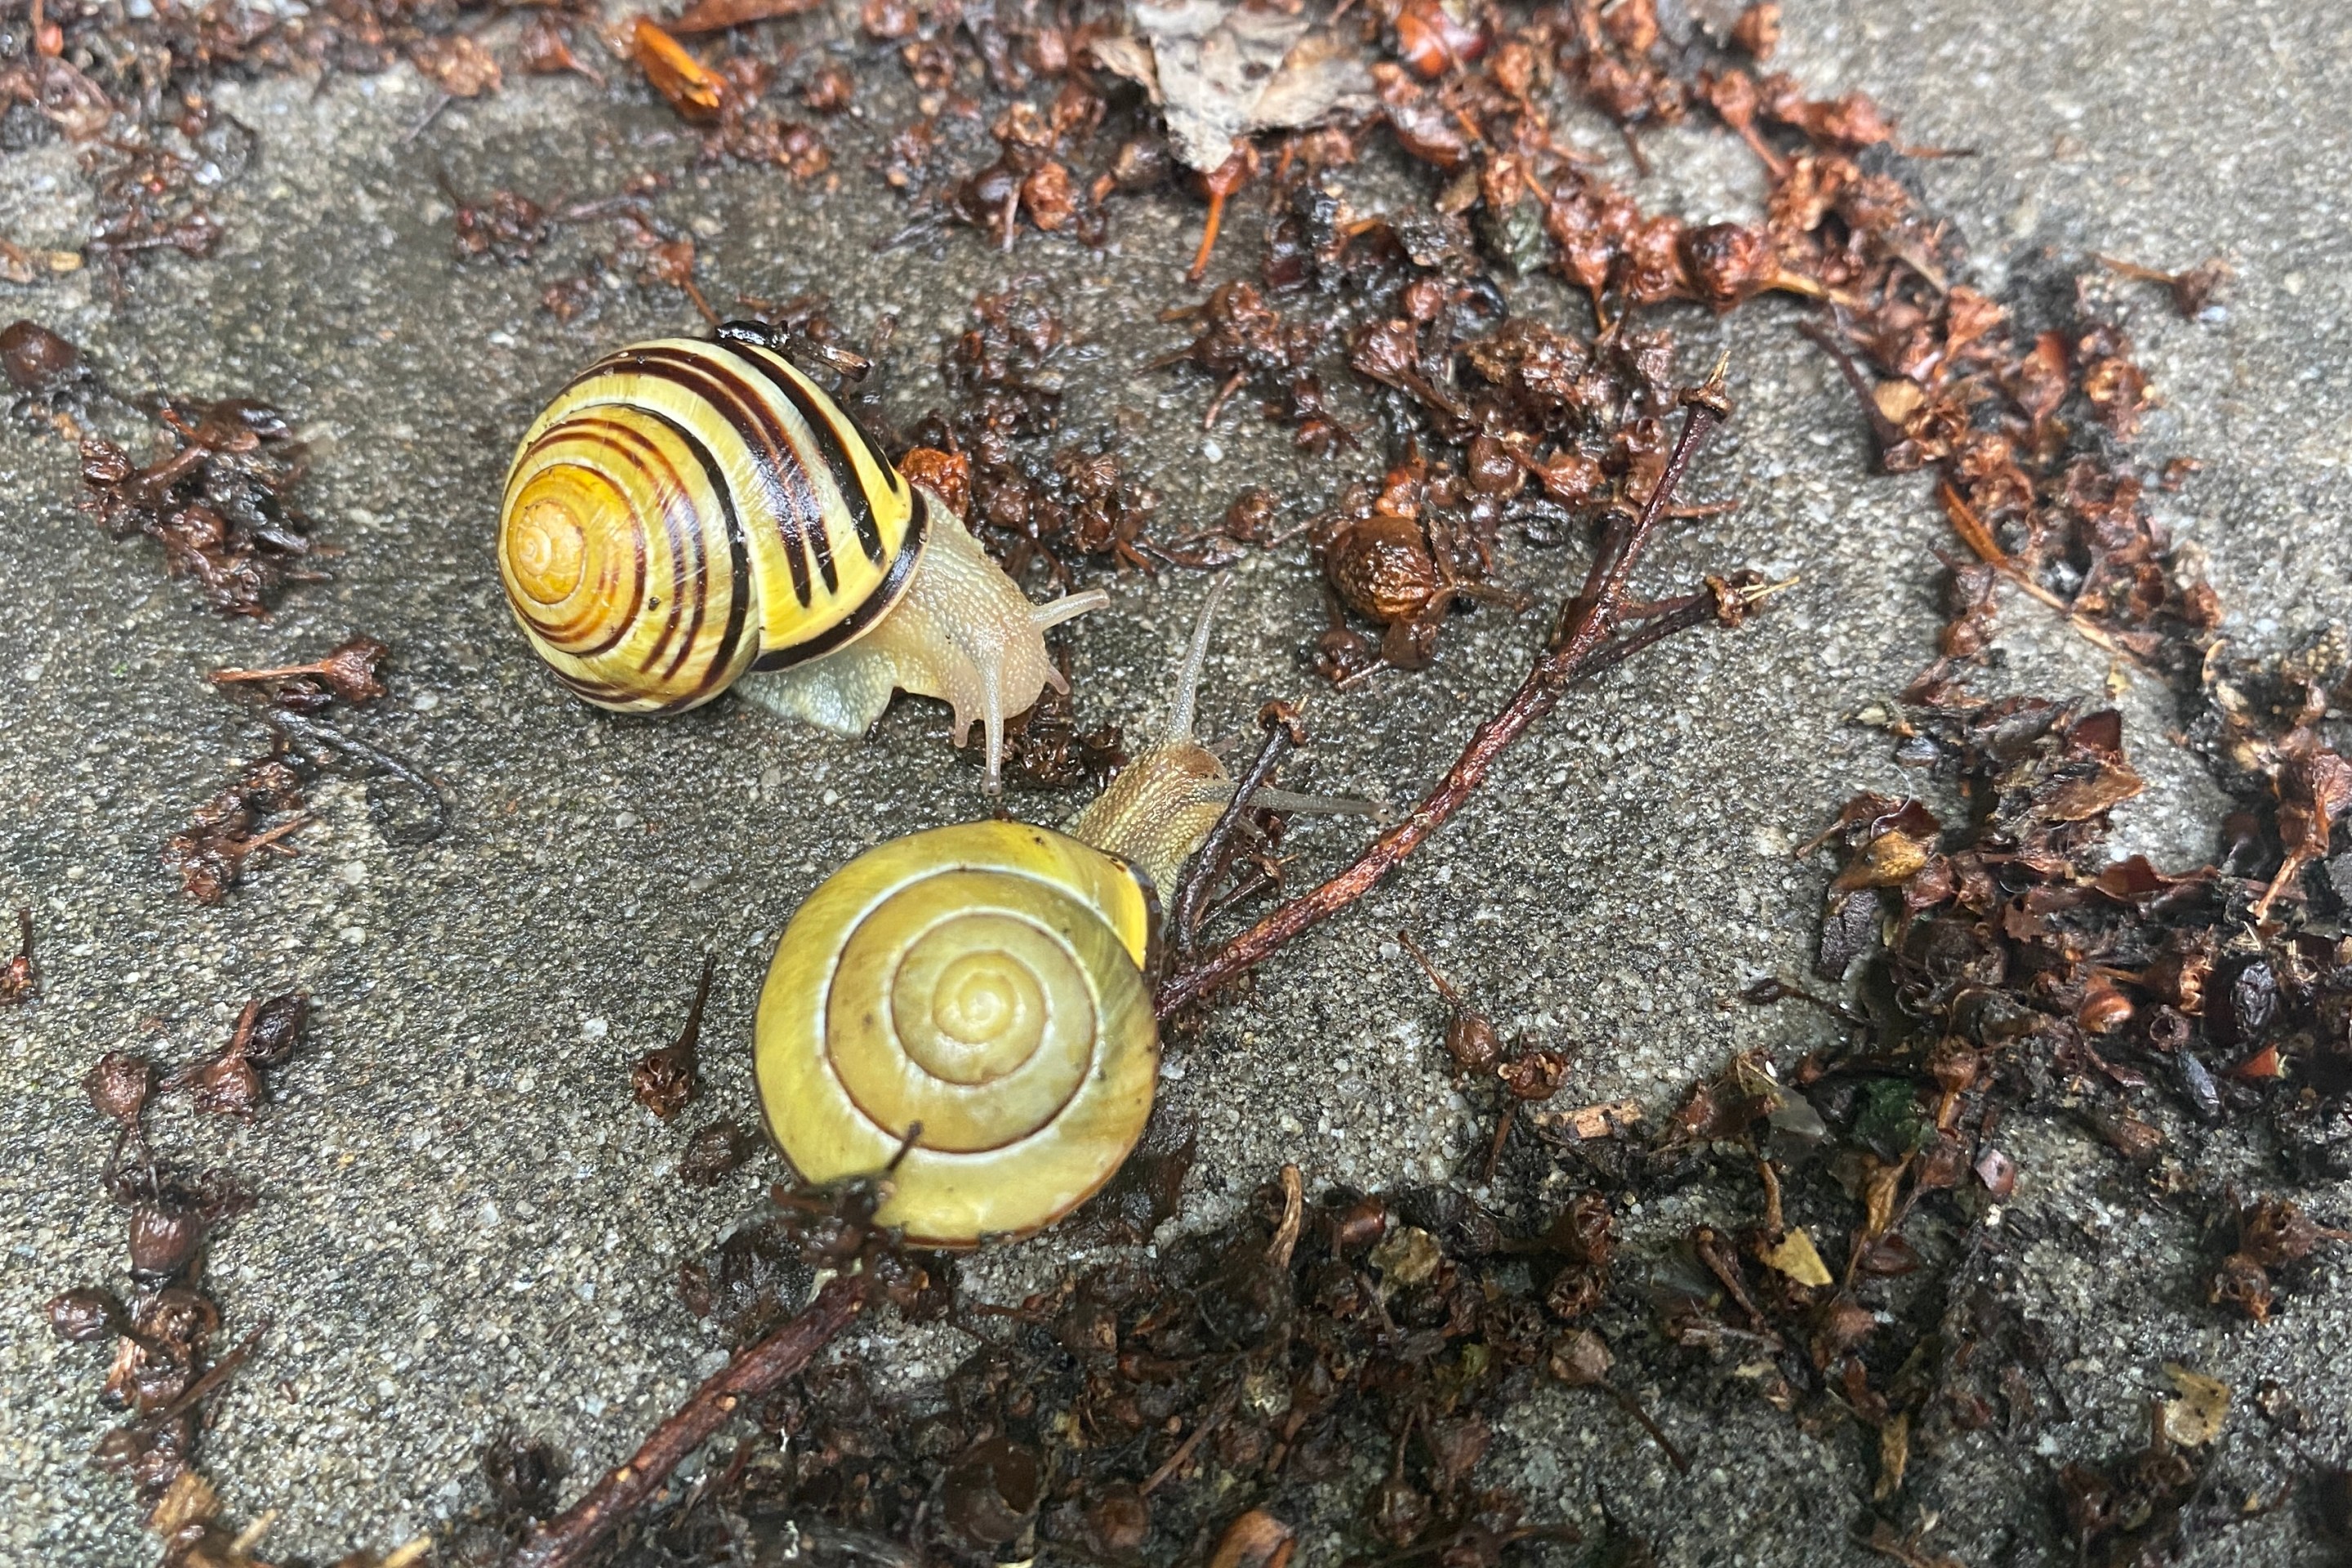 Two brown-lipped snails, cepea nemoralis, on the concrete.